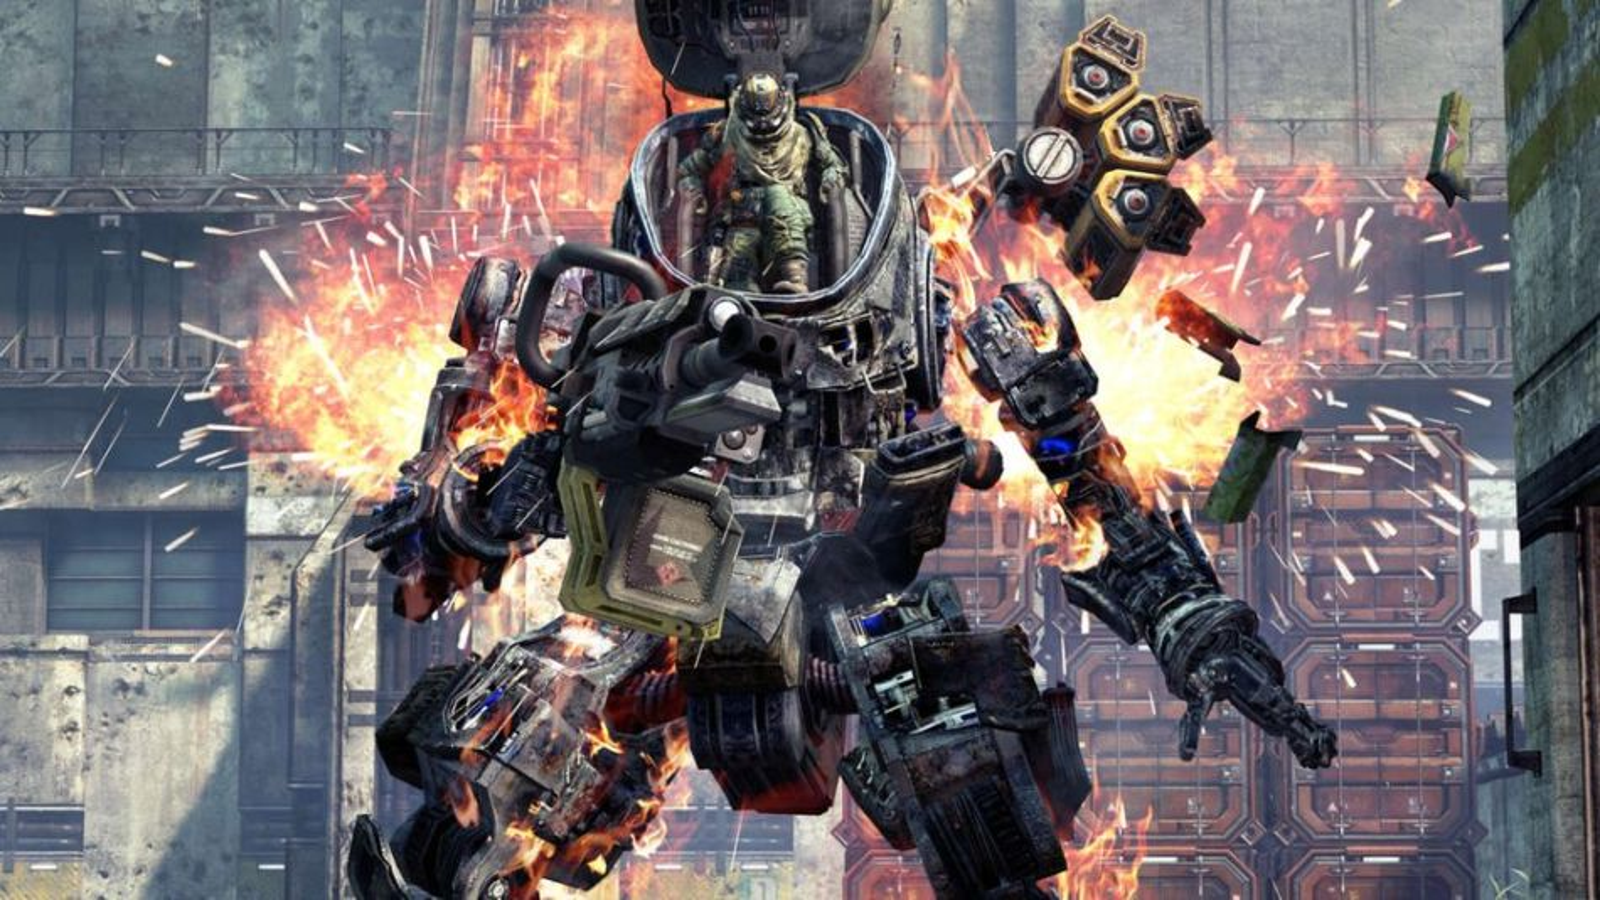 Titanfall 2 game director on a slower-paced multiplayer